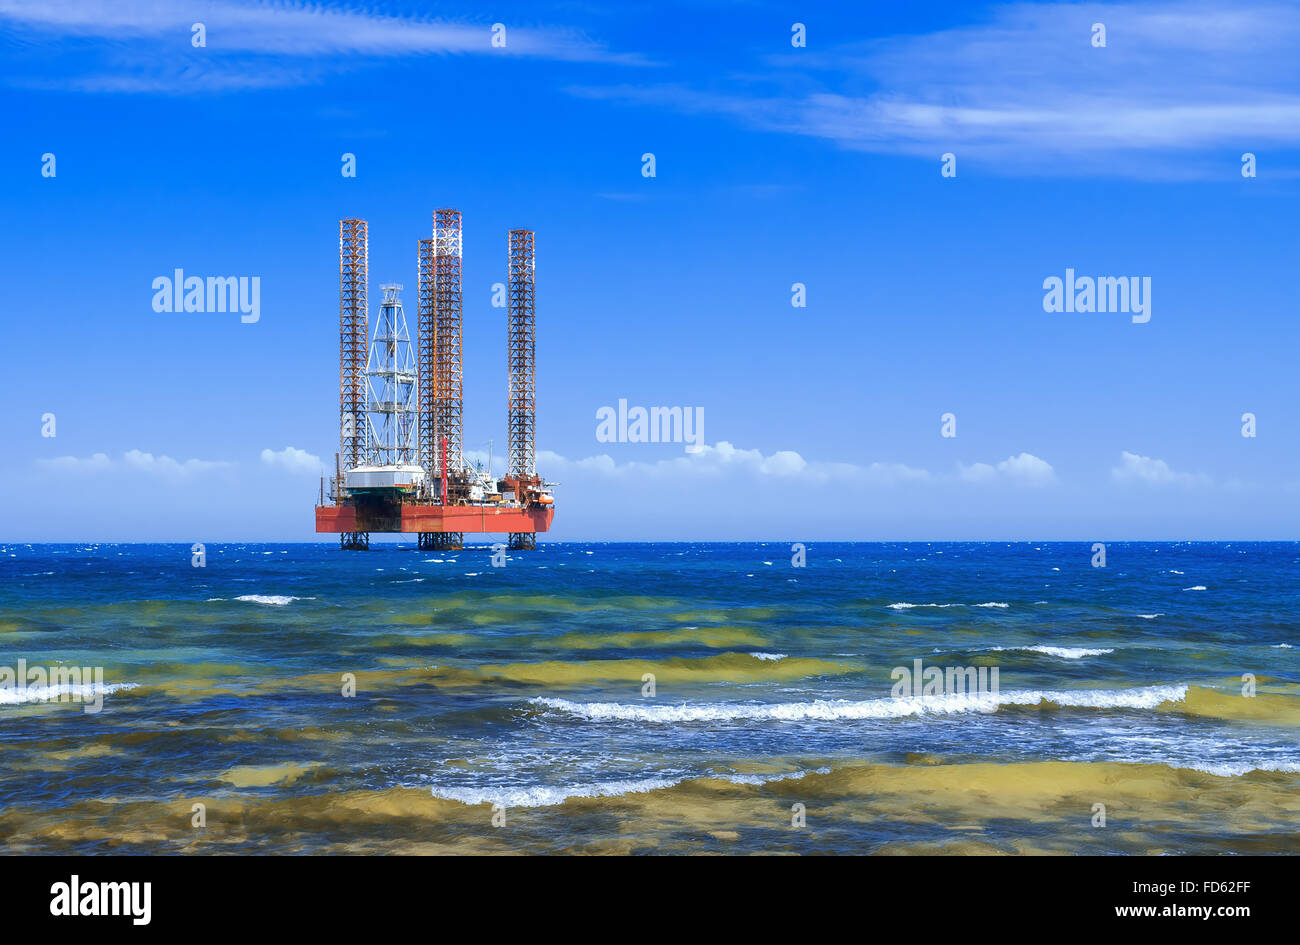 Offshore oil rig drilling platform in the sea against blue sky Stock Photo